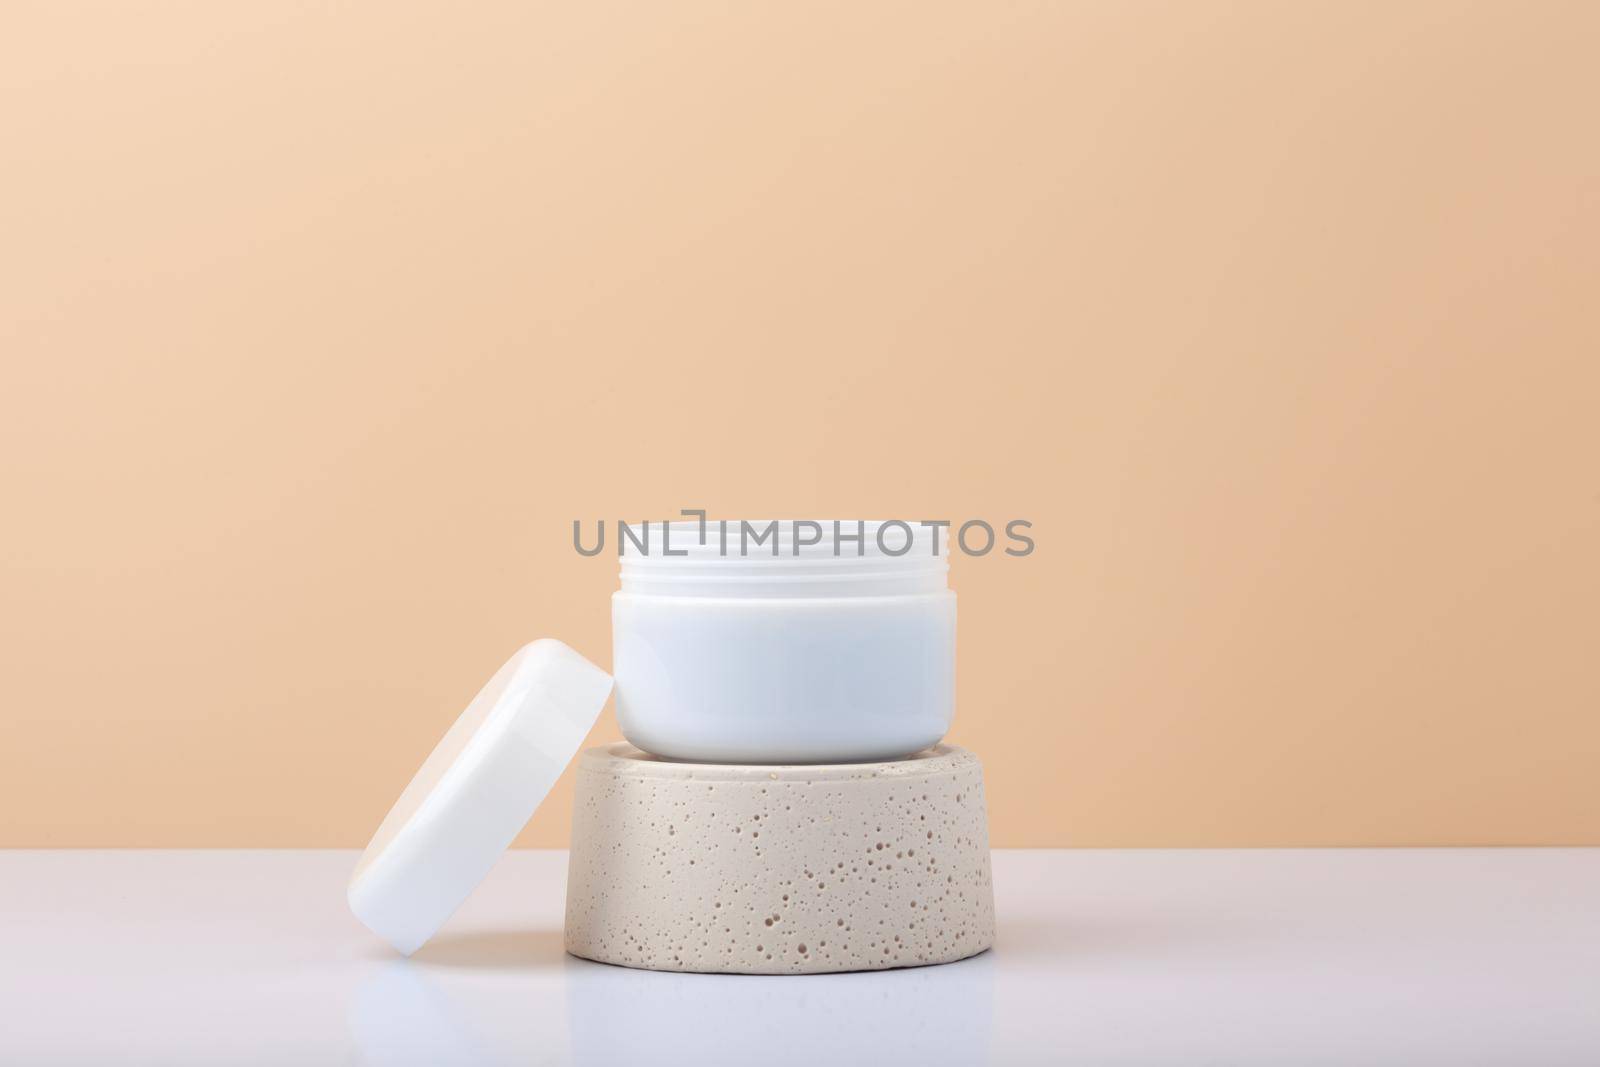 White cosmetic jar on gypsum podium against pastel beige background with copy space. Concept of organic natural skin care products with nourishing, moisturizing or anti aging effect